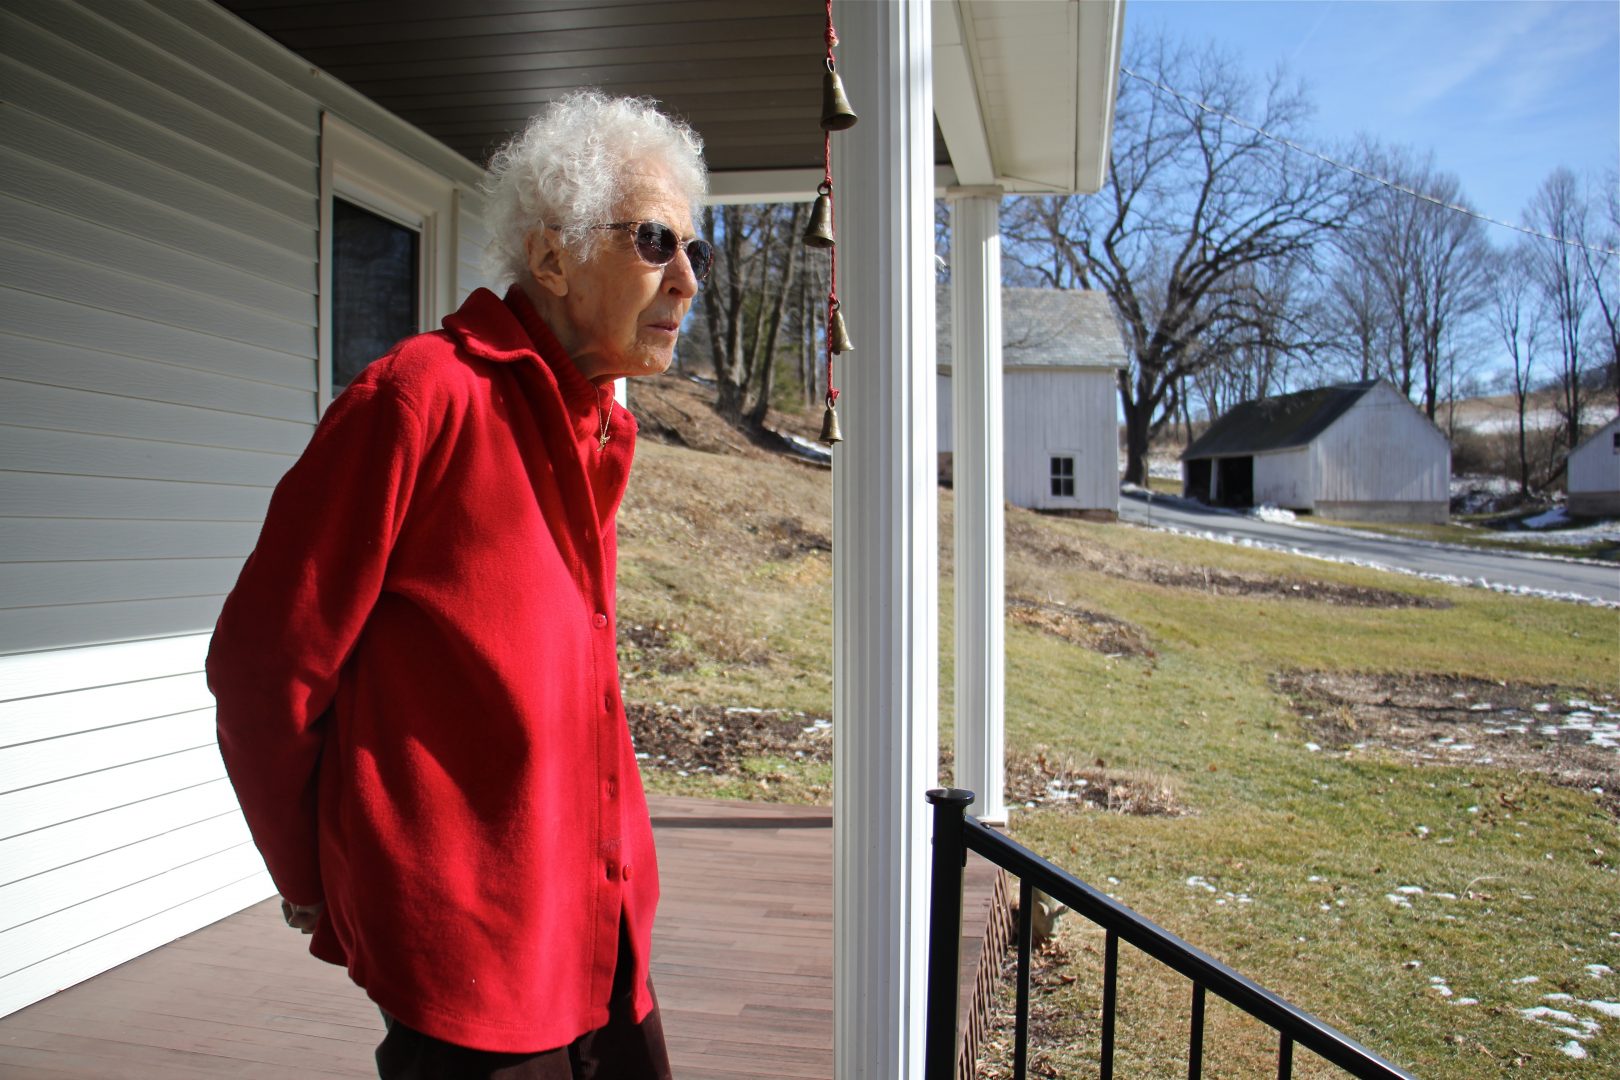 From the porch of her Palmerton farmhouse, Albertine Anthony looks out on the rolling hills of lower Carbon County. She believes the PennEast pipeline's proposed route through her 124-acre farm threatens her water supply. (Emma Lee/WHYY)